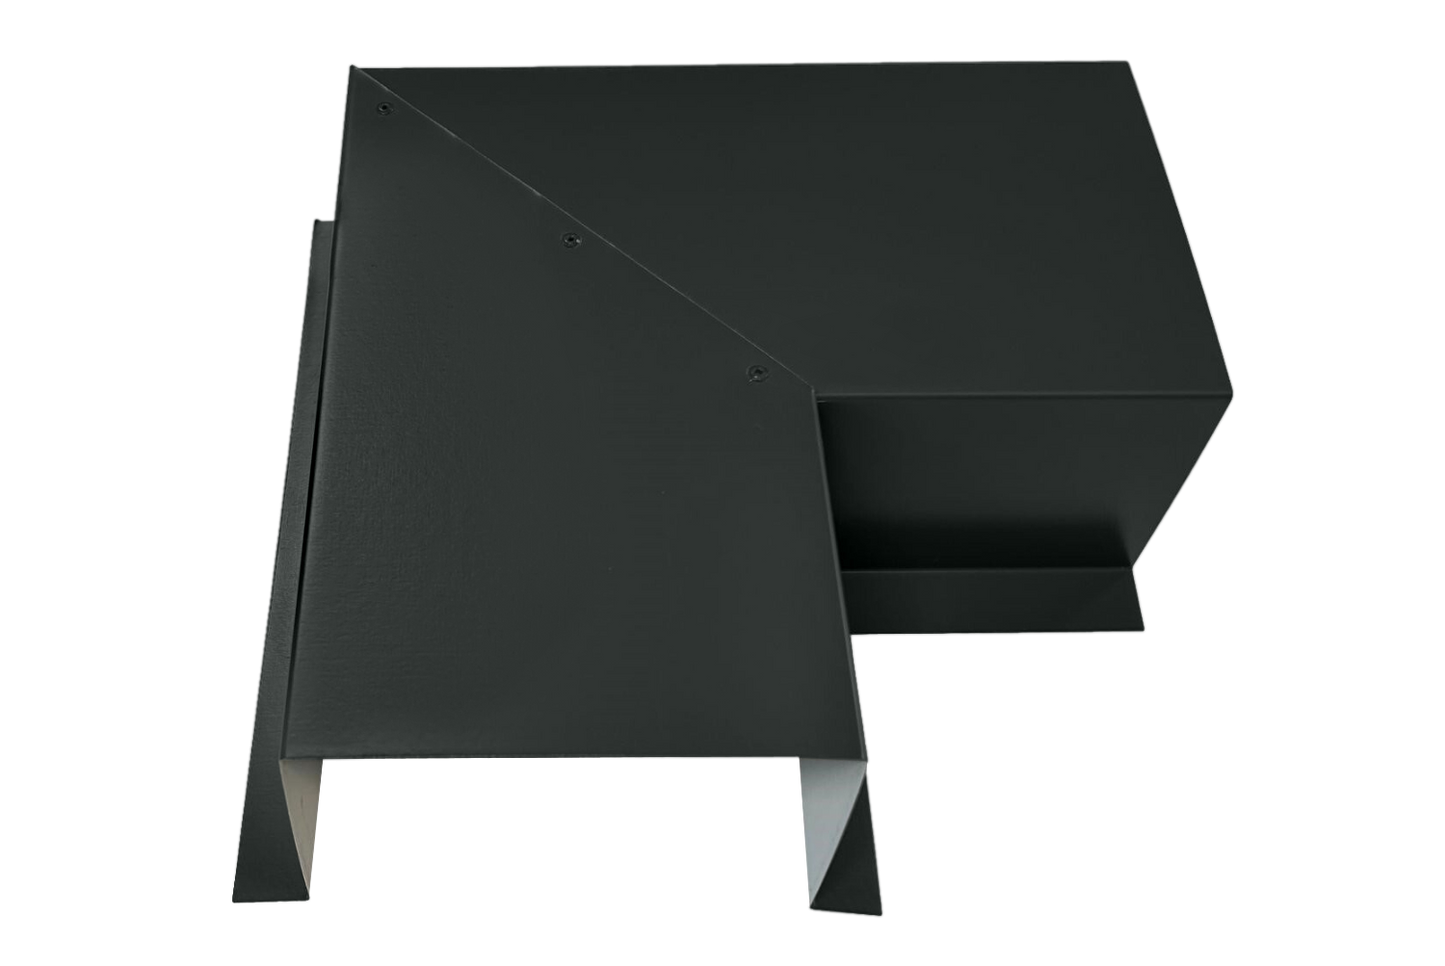 A black, abstract-shaped metal bracket made of premium quality 24 gauge steel with sharp angles. One part extends horizontally while another section angles downward, creating an L-like form. The object has a modern, industrial appearance and is designed for easy installation as an HVAC line set cover: the Perma Cover Commercial Series - 24 Gauge Line Set Cover Side Turning Elbows - Premium Quality.